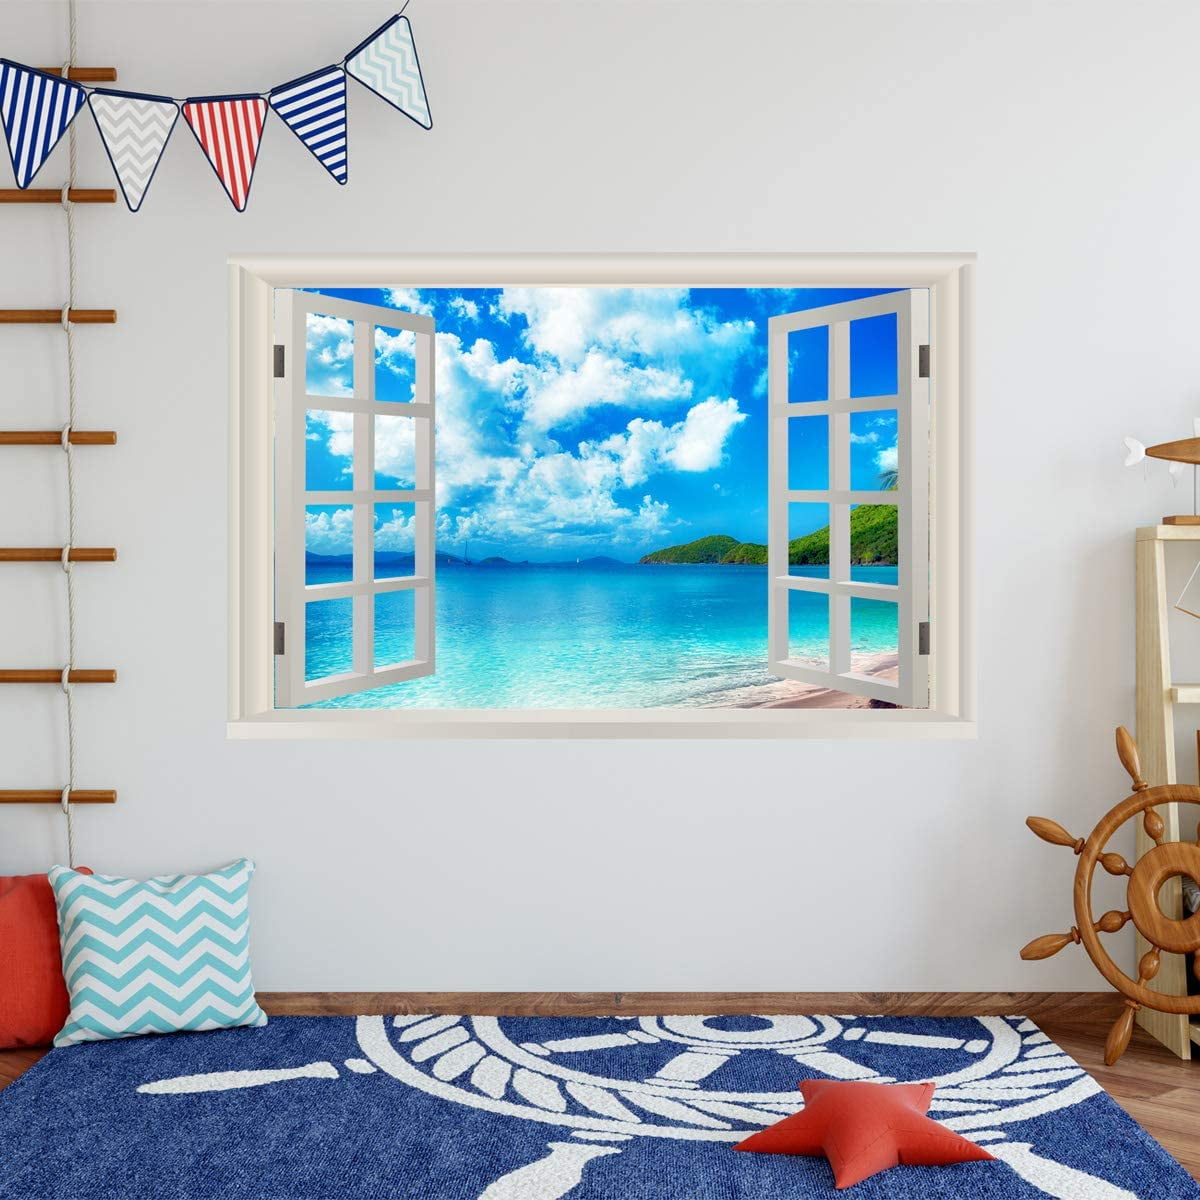 24" Porthole Window TROPICAL BEACH at SUNSET #1 ROUND Wall Sticker Decal Graphic 